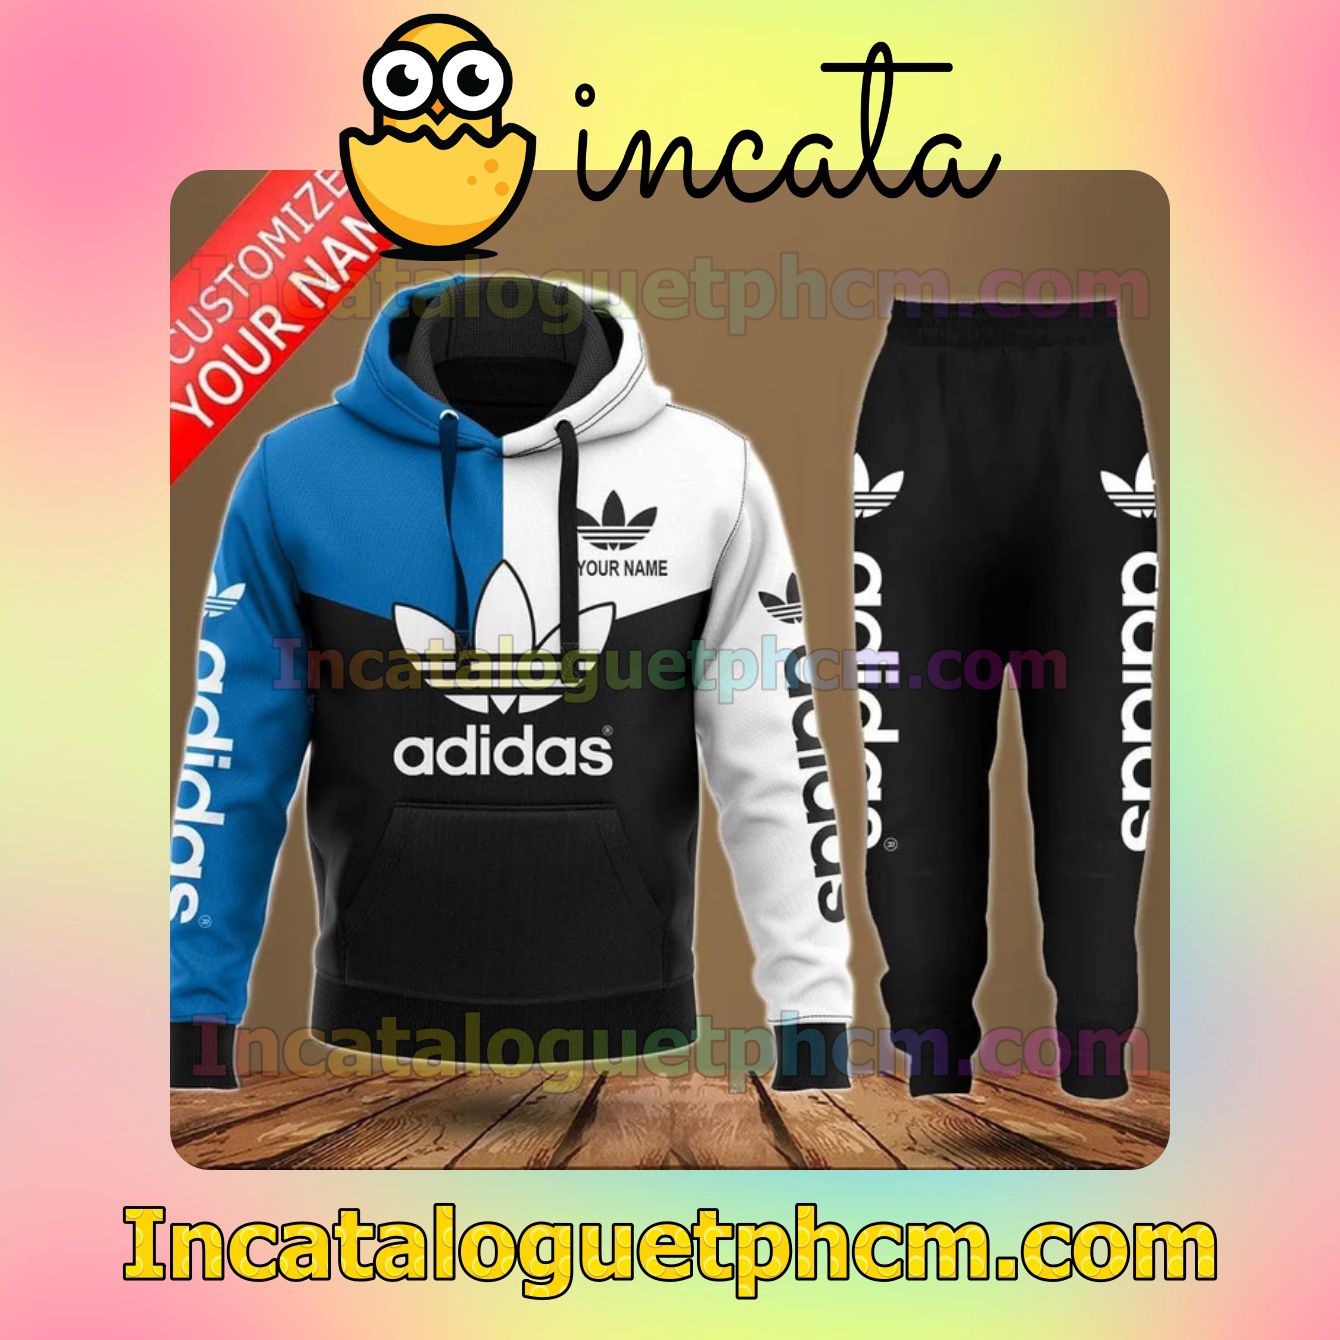 Real Personalized Adidas Mix Color Blue White And Black Zipper Hooded Sweatshirt And Pants